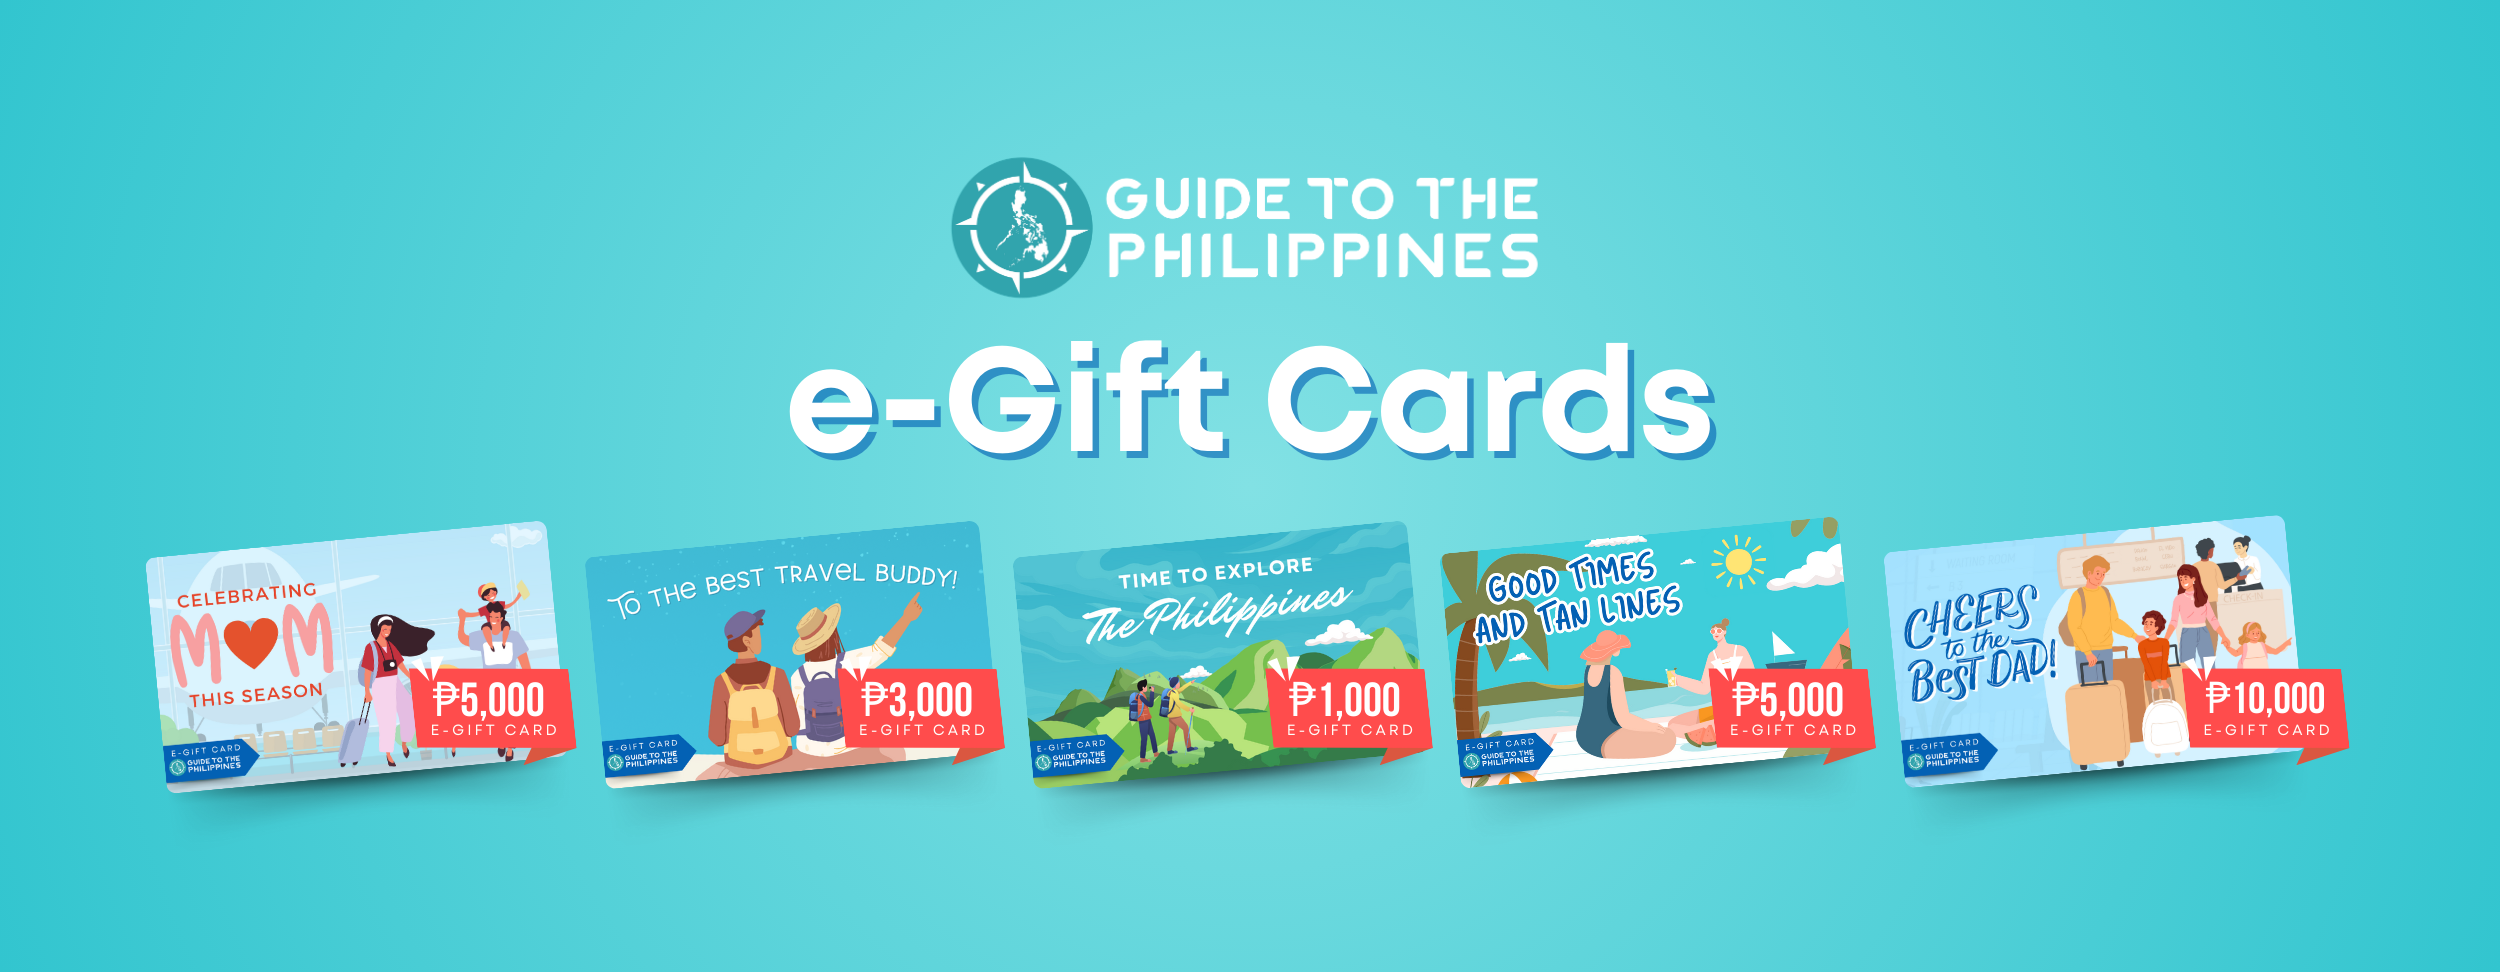 Guide to the Philippines Online Travel Gift Card | Starts at PHP1000 |  Guide to the Philippines